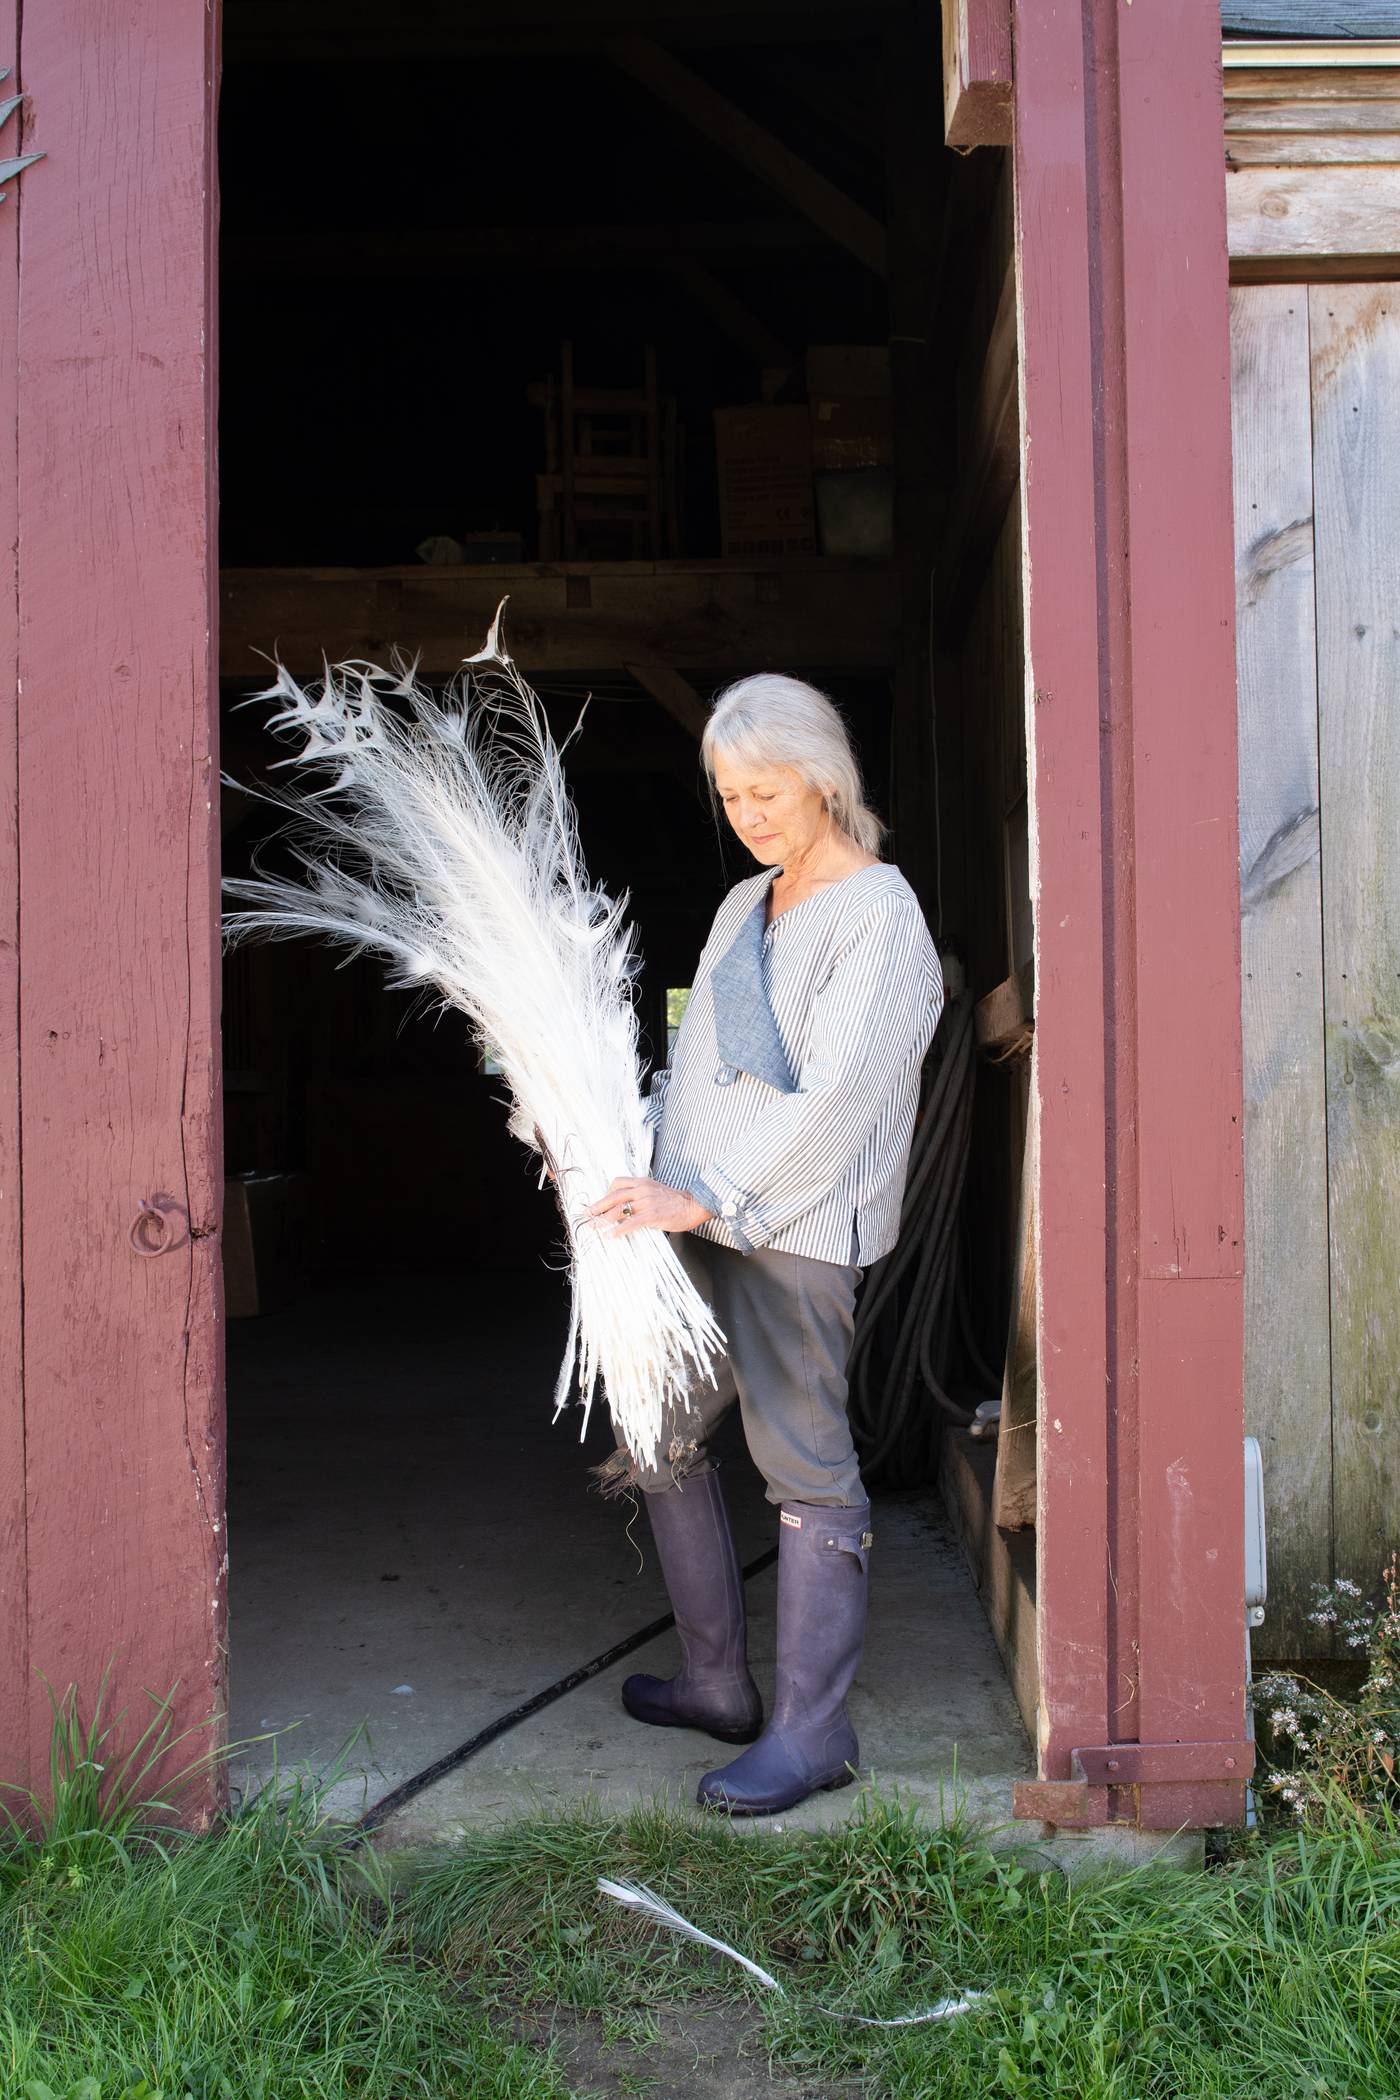 June, in the blue Latchkey jacket, holding white peacock feathers and looking down